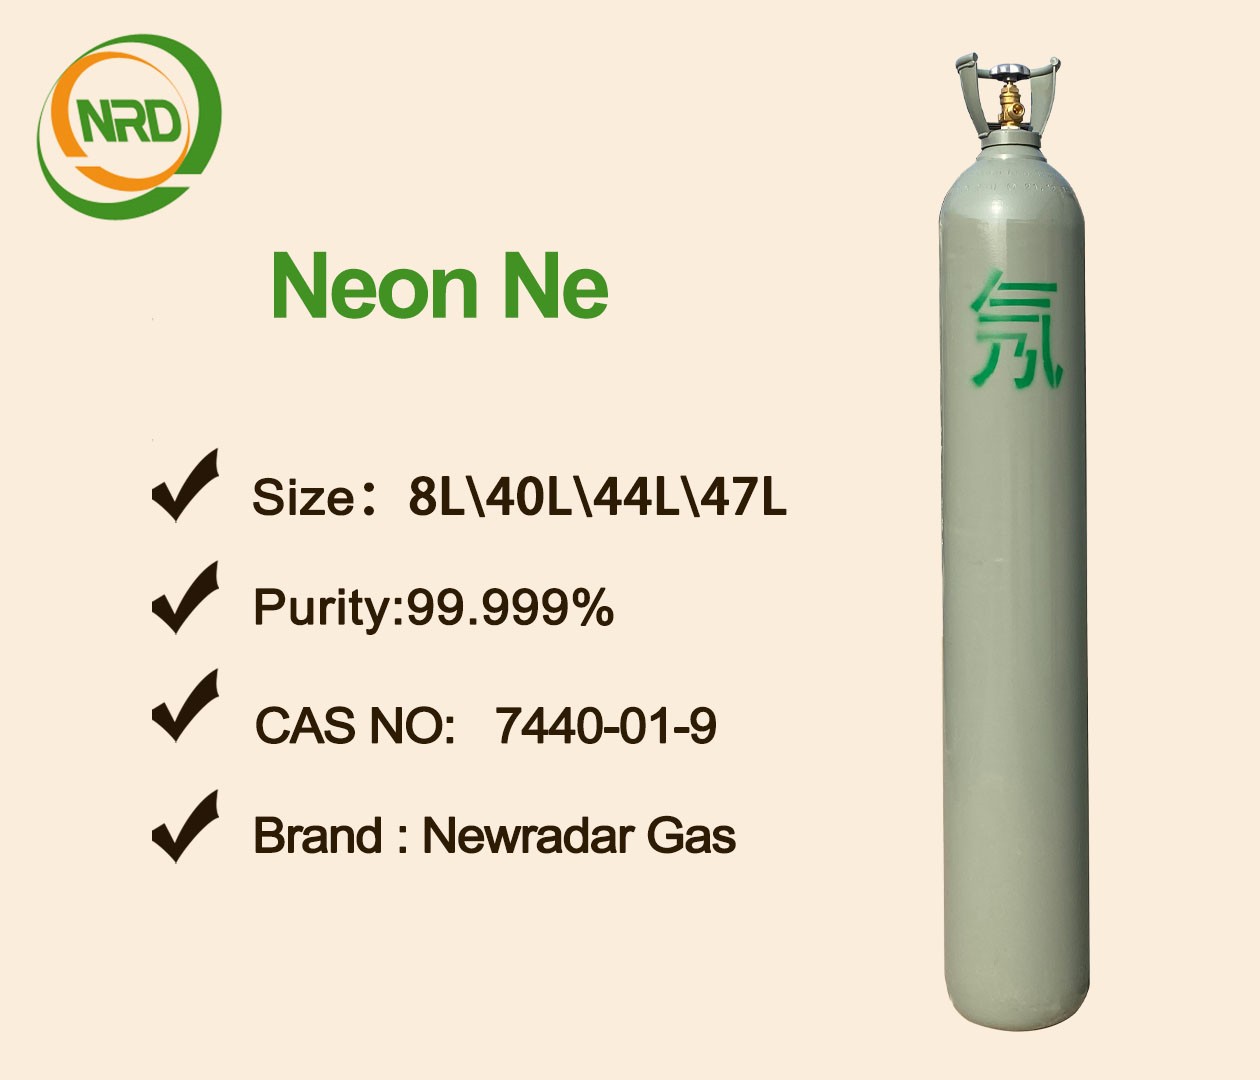 Neon Gas in high-tech applications